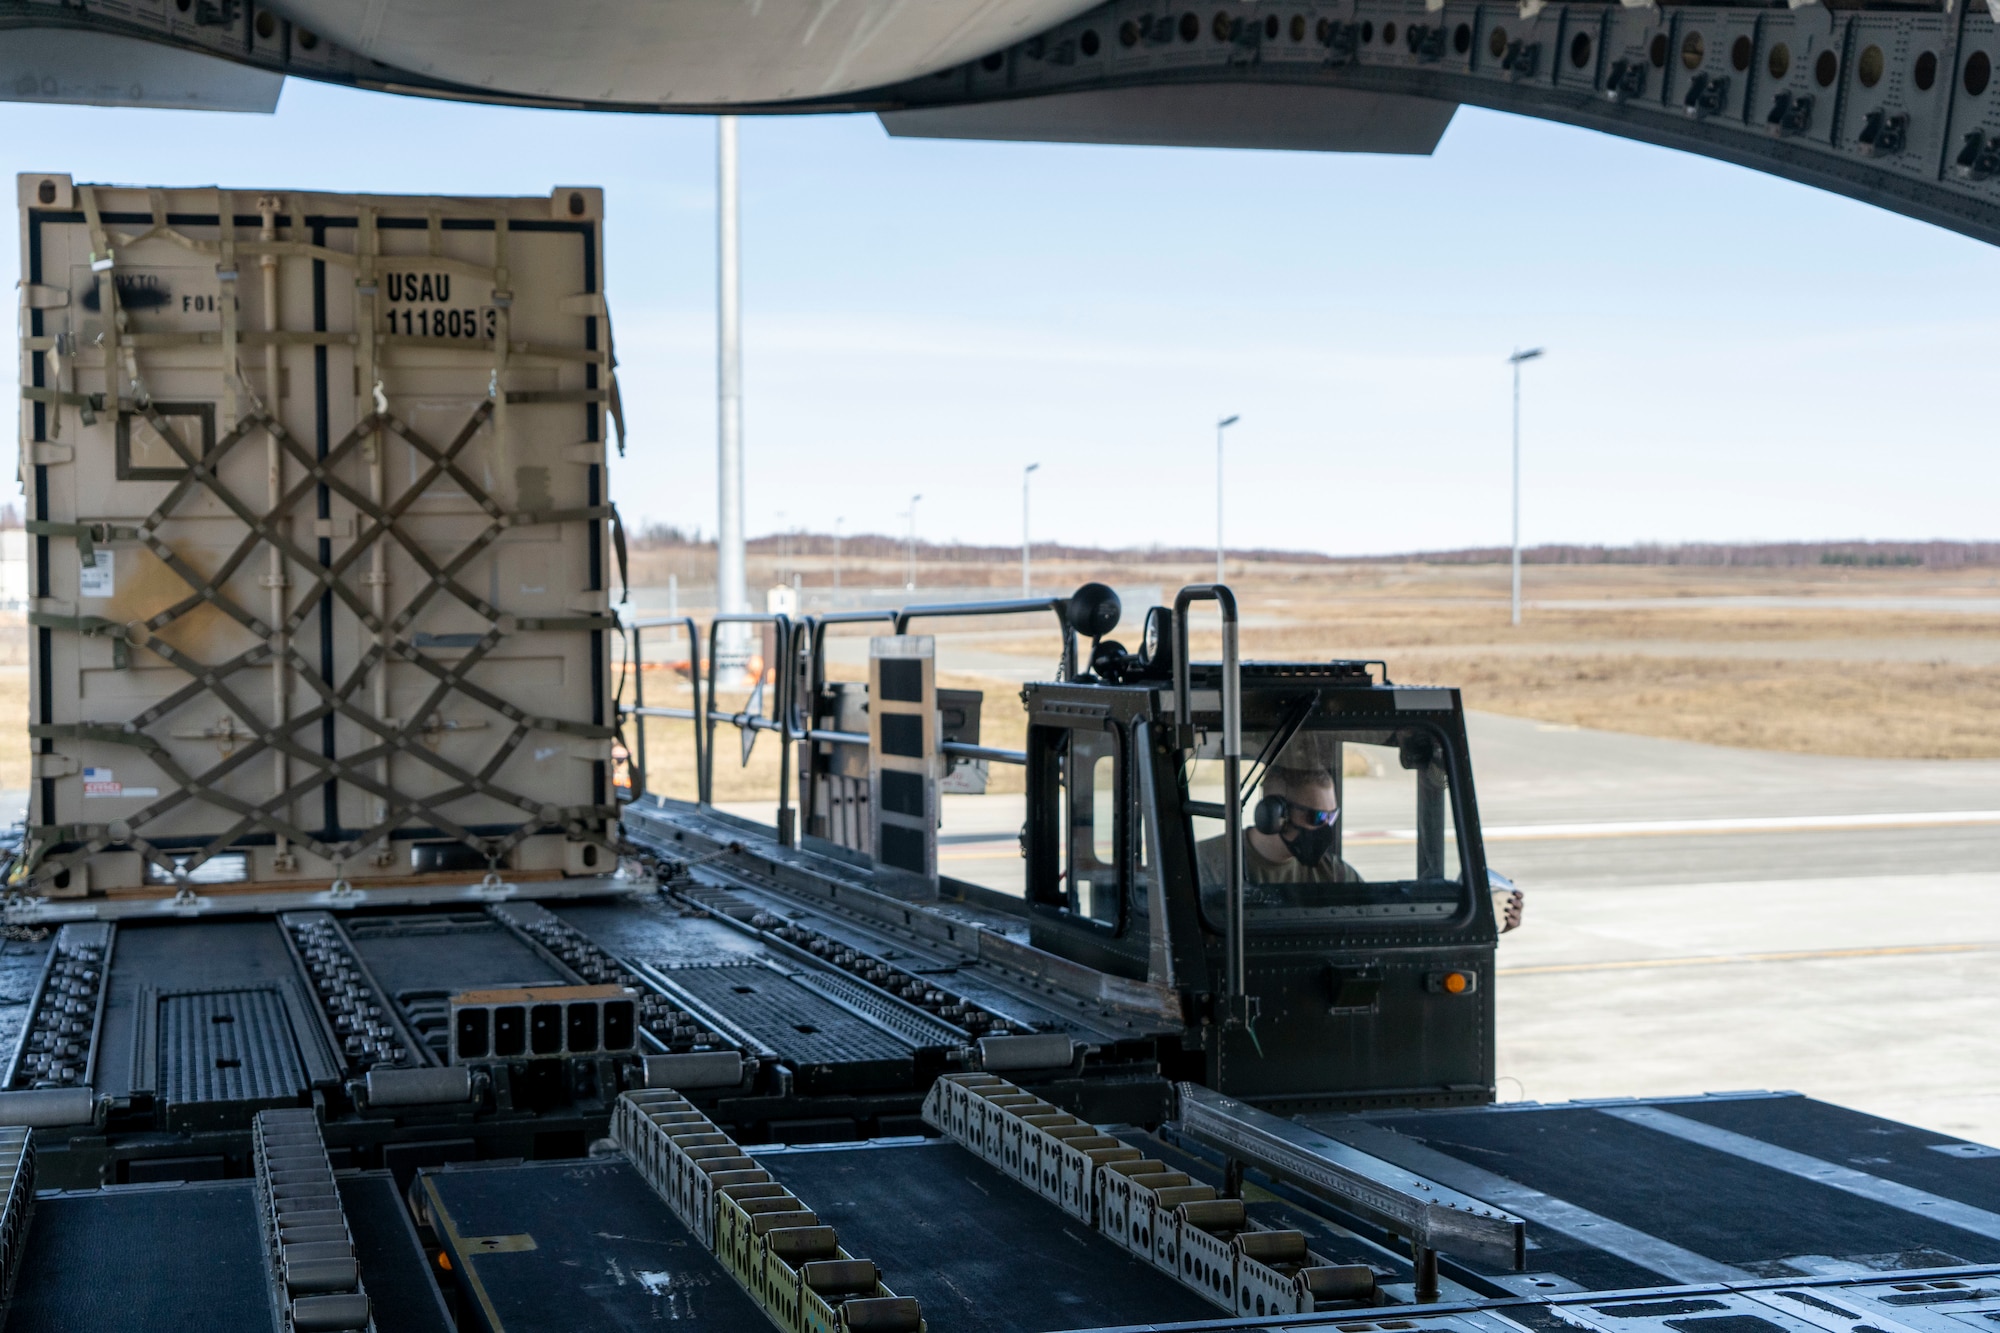 U.S. Air Force Airman 1st Class Dustin Jenkins, a 732d Air Mobility Squadron air freight technician, maneuvers a K-loader near a C-17 Globemaster III assigned to Joint Base Lewis-McChord, Washington, on the flightline at Joint Base Elmendorf-Richardson, Alaska, May 1, 2021, in support of Northern Edge 2021. Approximately 15,000 U.S. service members are participating in a joint training exercise hosted by U.S. Pacific Air Forces May 3-14, 2021, on and above the Joint Pacific Alaska Range Complex, the Gulf of Alaska, and temporary maritime activities area. NE21 is one in a series of U.S. Indo-Pacific Command exercises designed to sharpen the joint forces’ skills; to practice tactics, techniques, and procedures; to improve command, control and communication relationships; and to develop cooperative plans and programs.